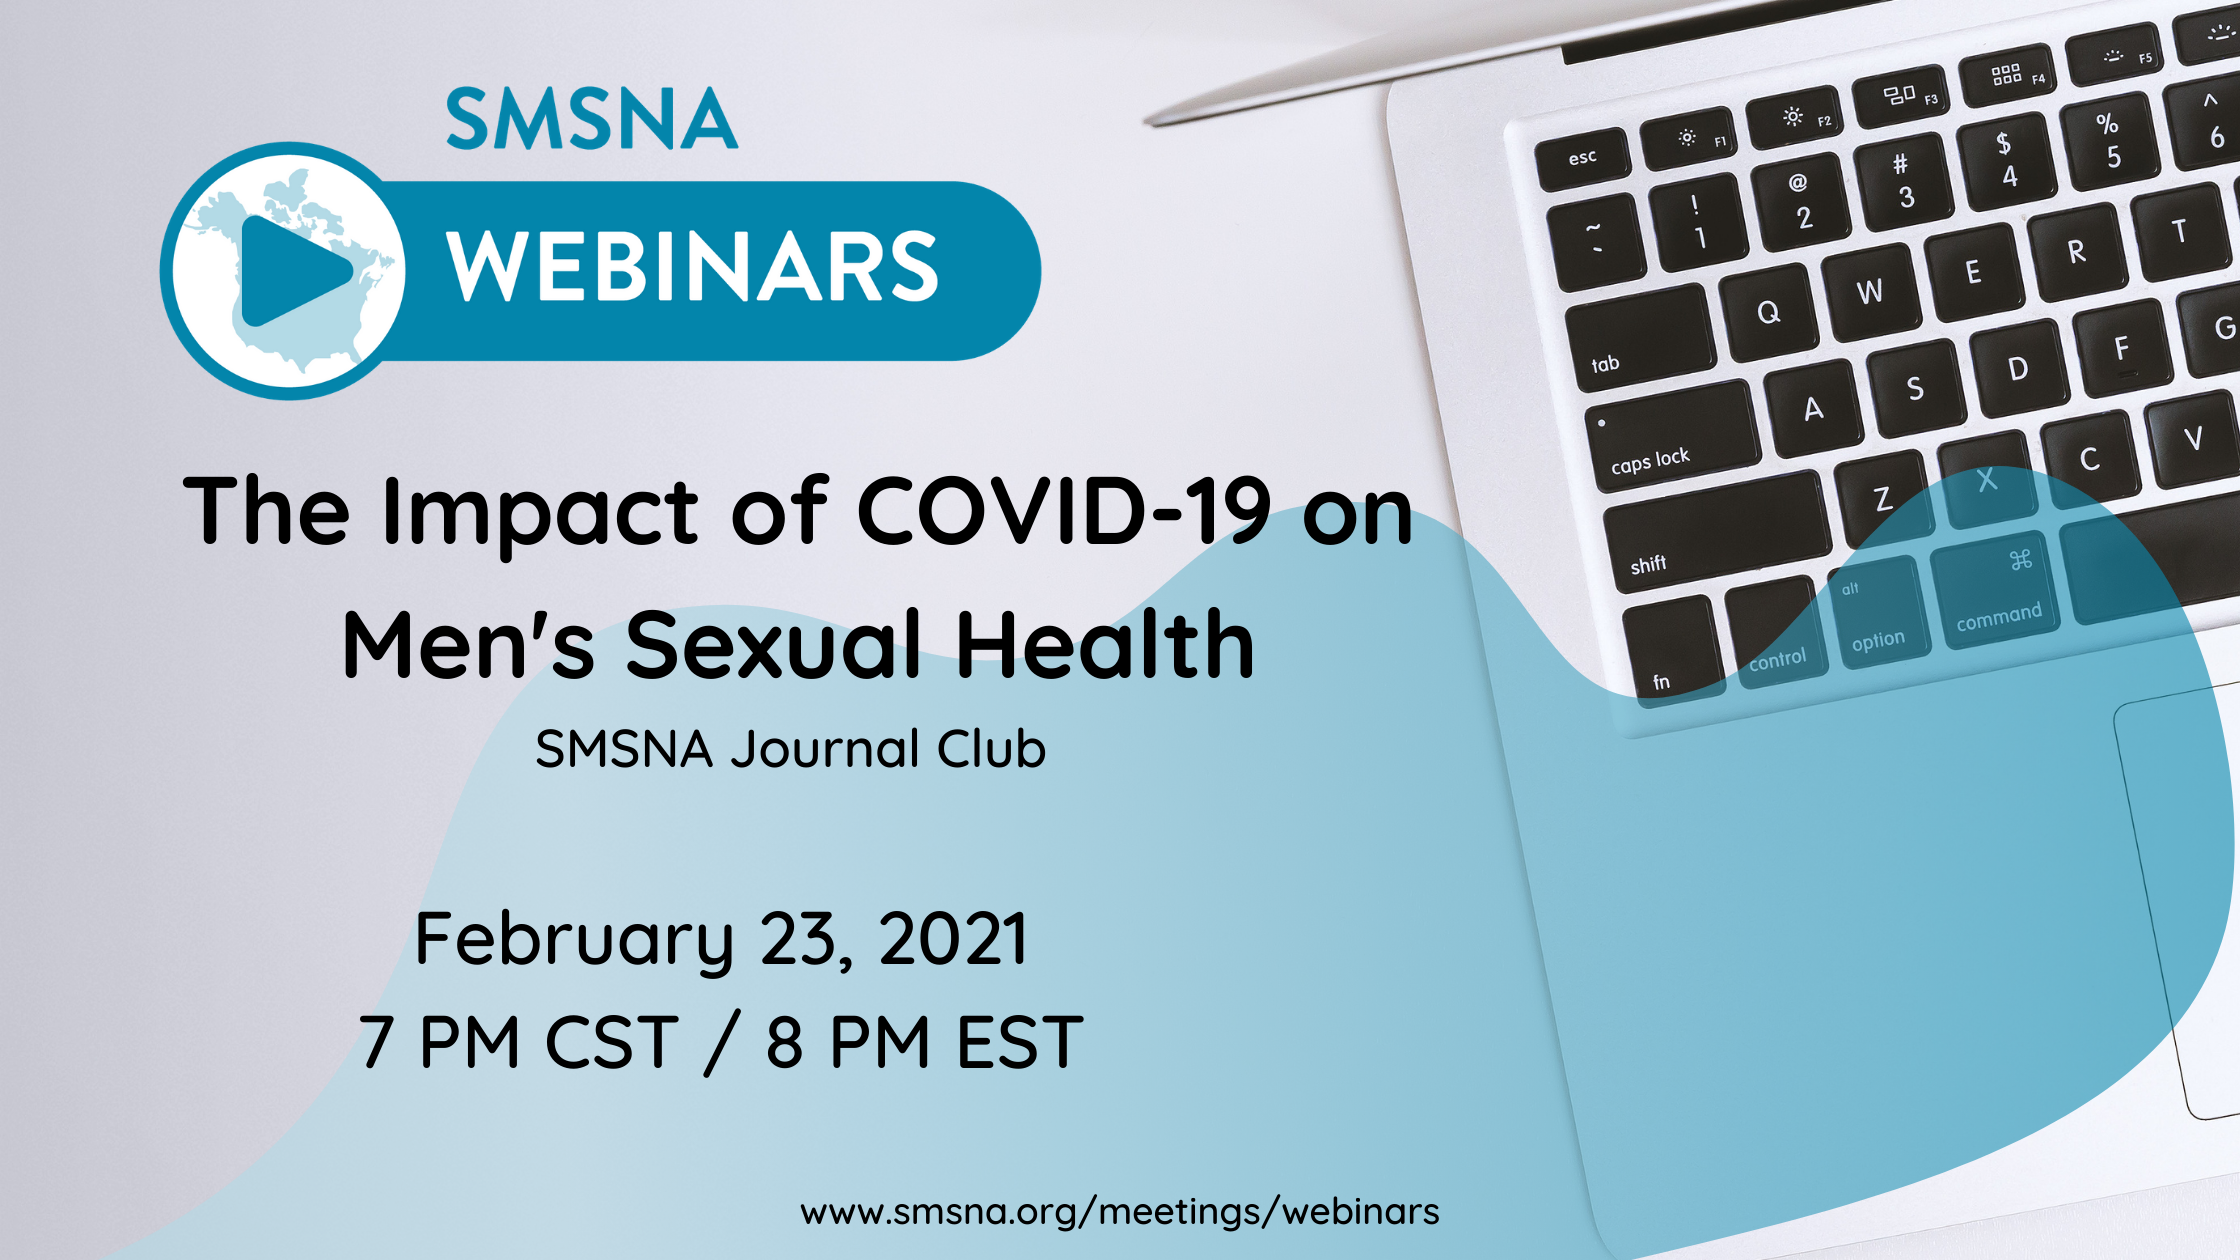 The Impact of COVID-19 on Men's Sexual Health